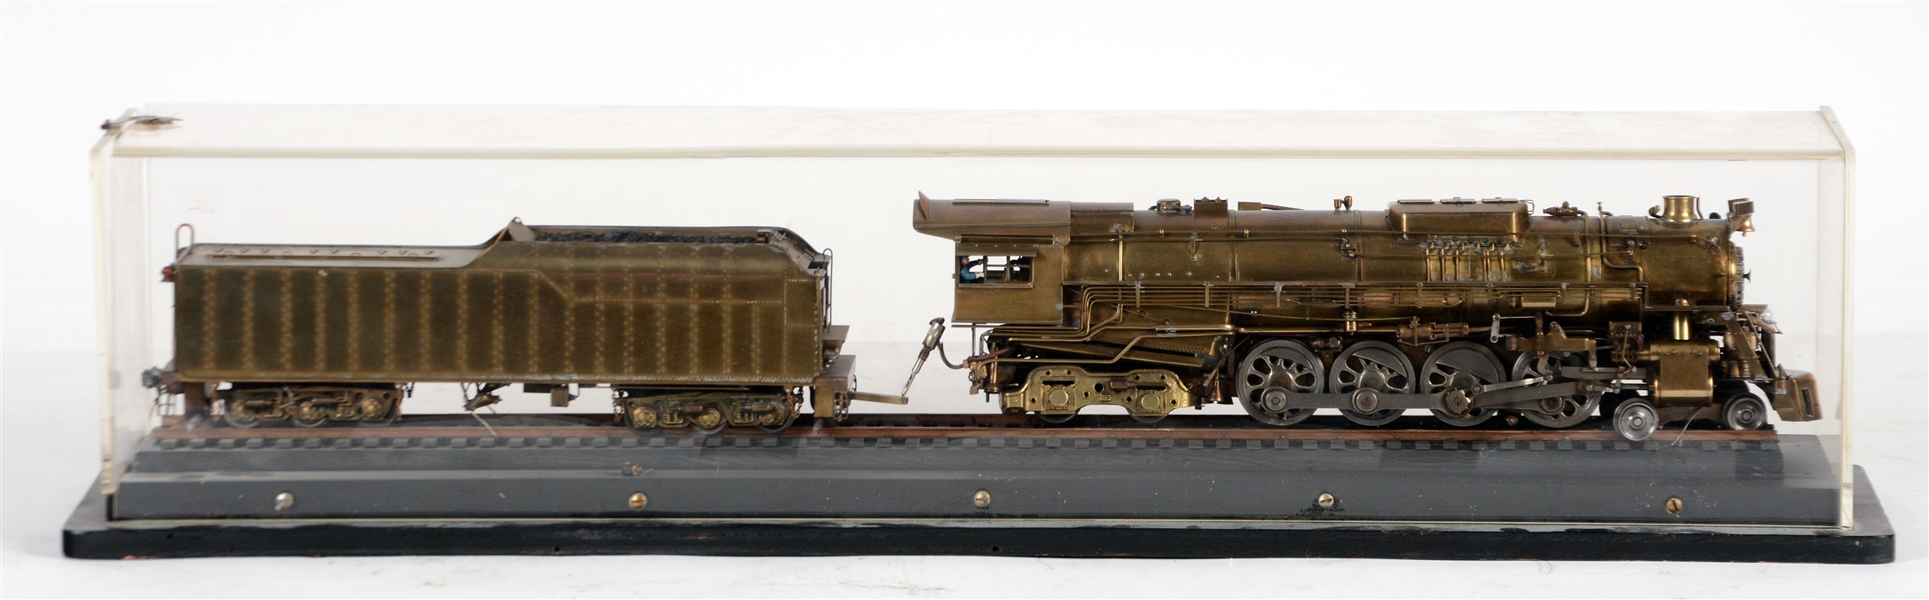 LOCOMOTIVE WITH TENDER ON TRACK IN DISPLAY CASE.